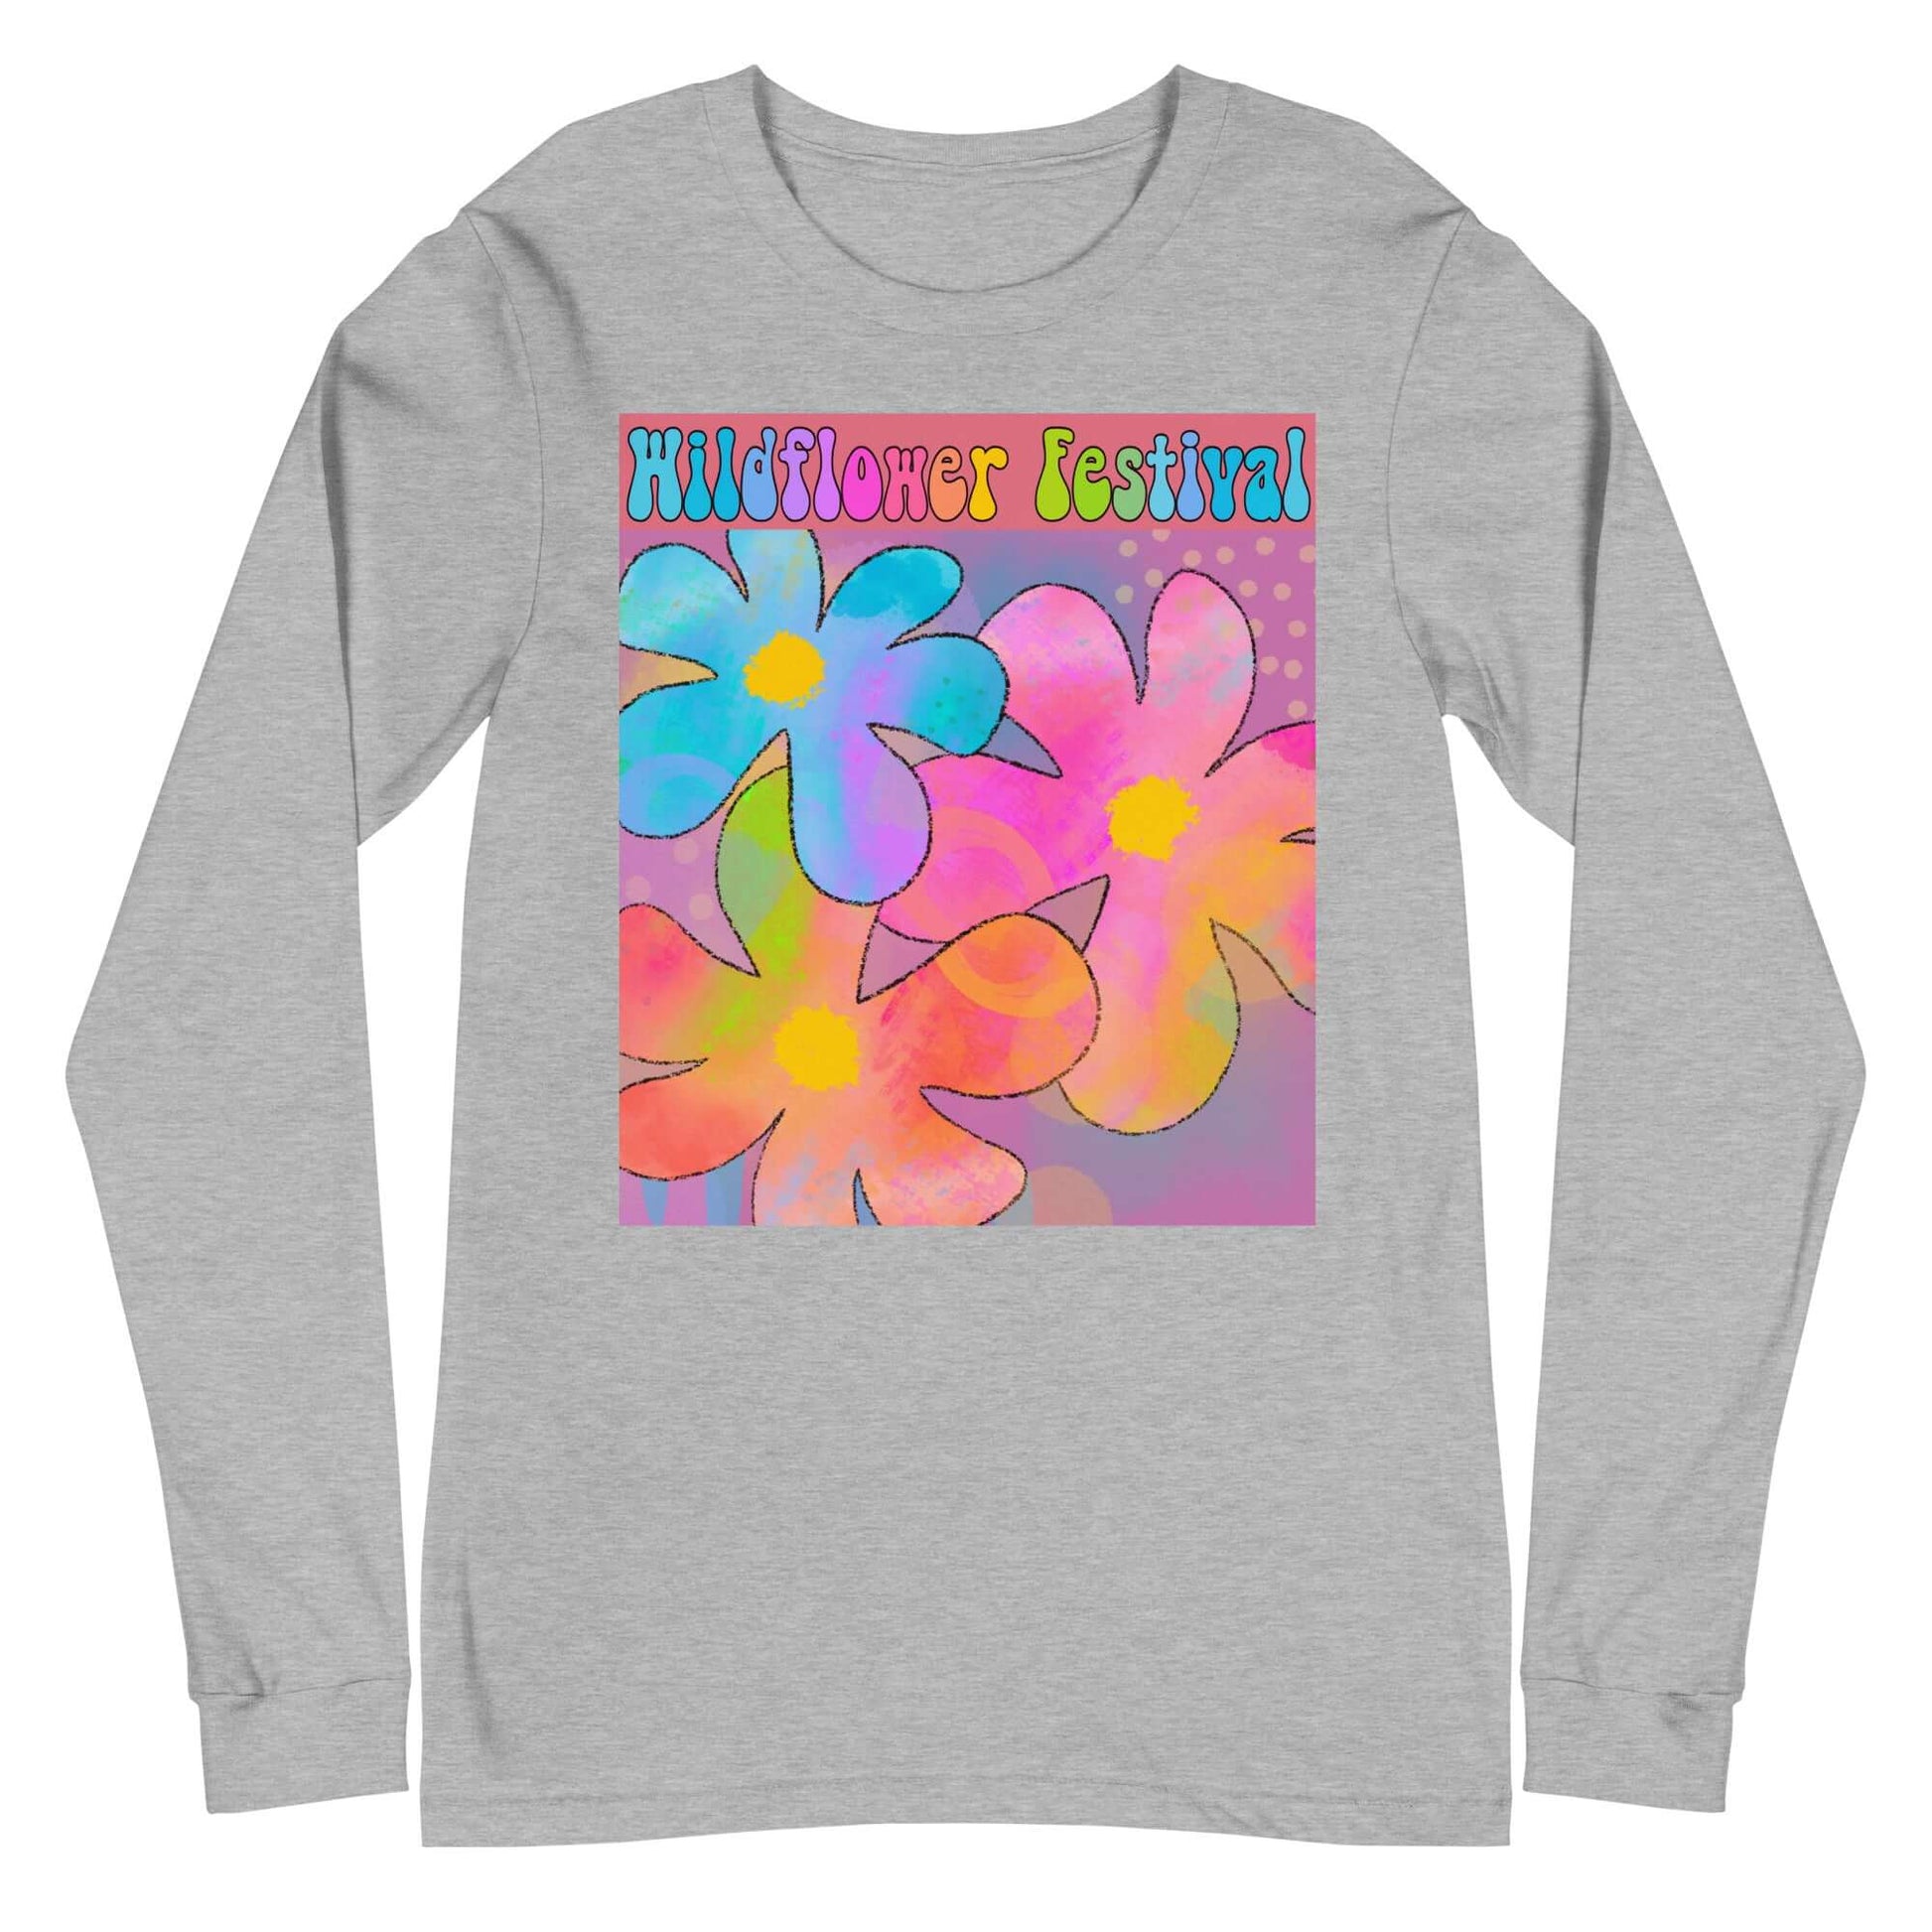 Big Colorful Hippie 1960s Psychedelic Flowers with Text “Wildflower Festival” Unisex Long Sleeve Tee in Athletic Heather Gray